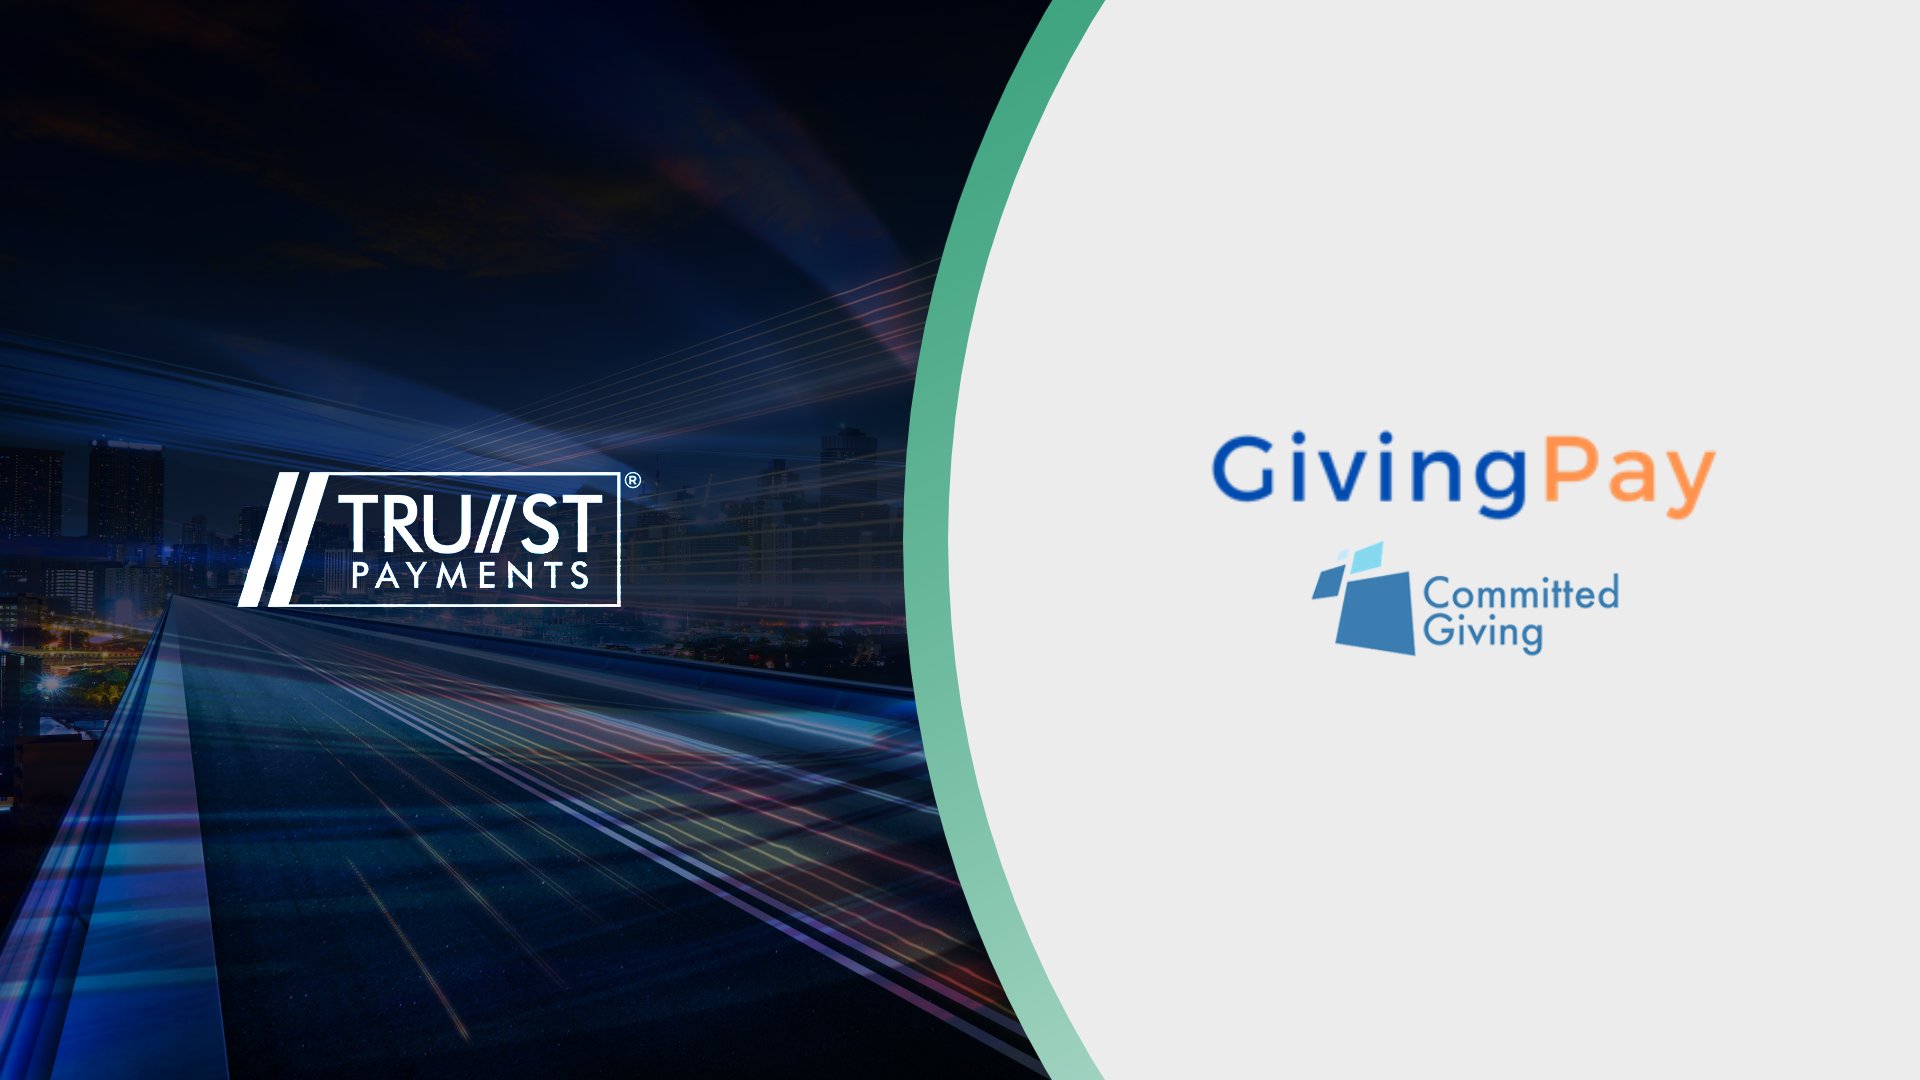 Trust Payments to power frictionless charity donations through ‘GivingPay’